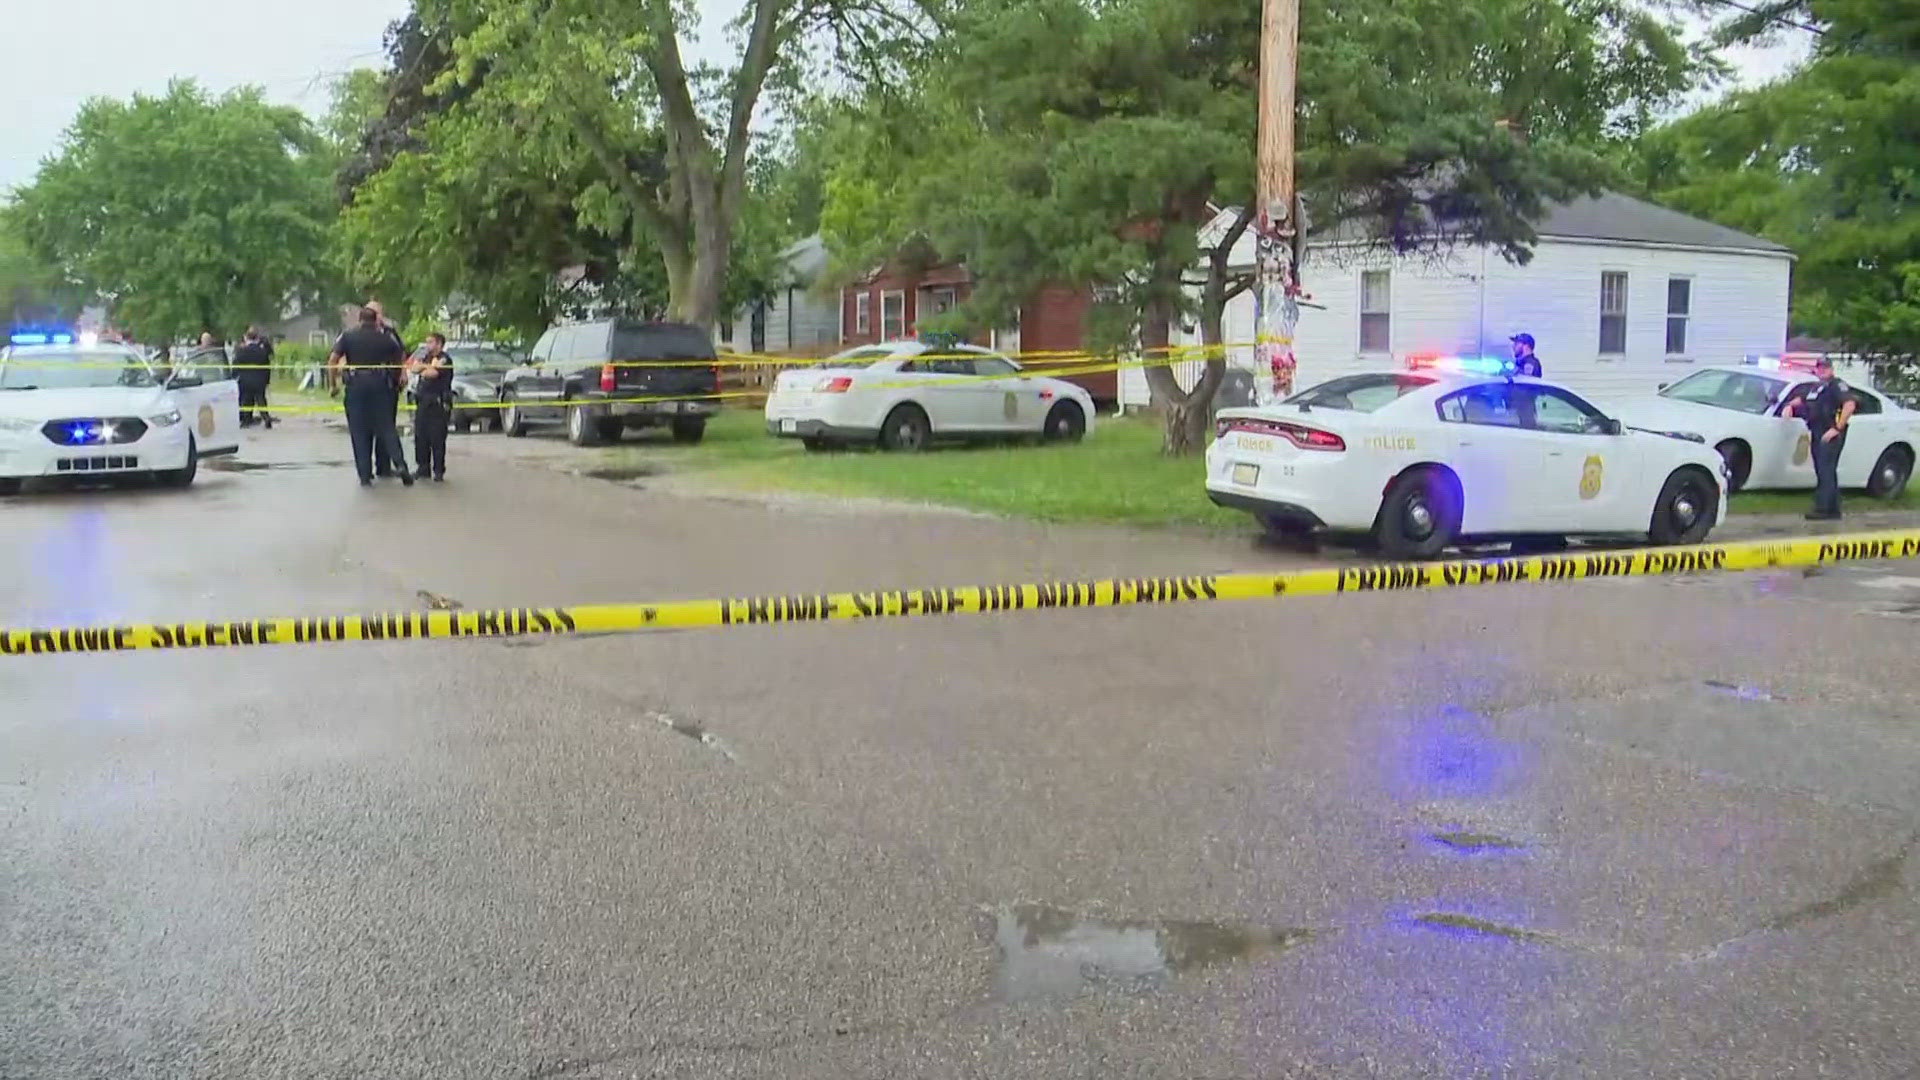 13News reporter Chase Houle reports from near 12th Street and Tibbs Avenue where one person is dead following a shooting Thursday afternoon.